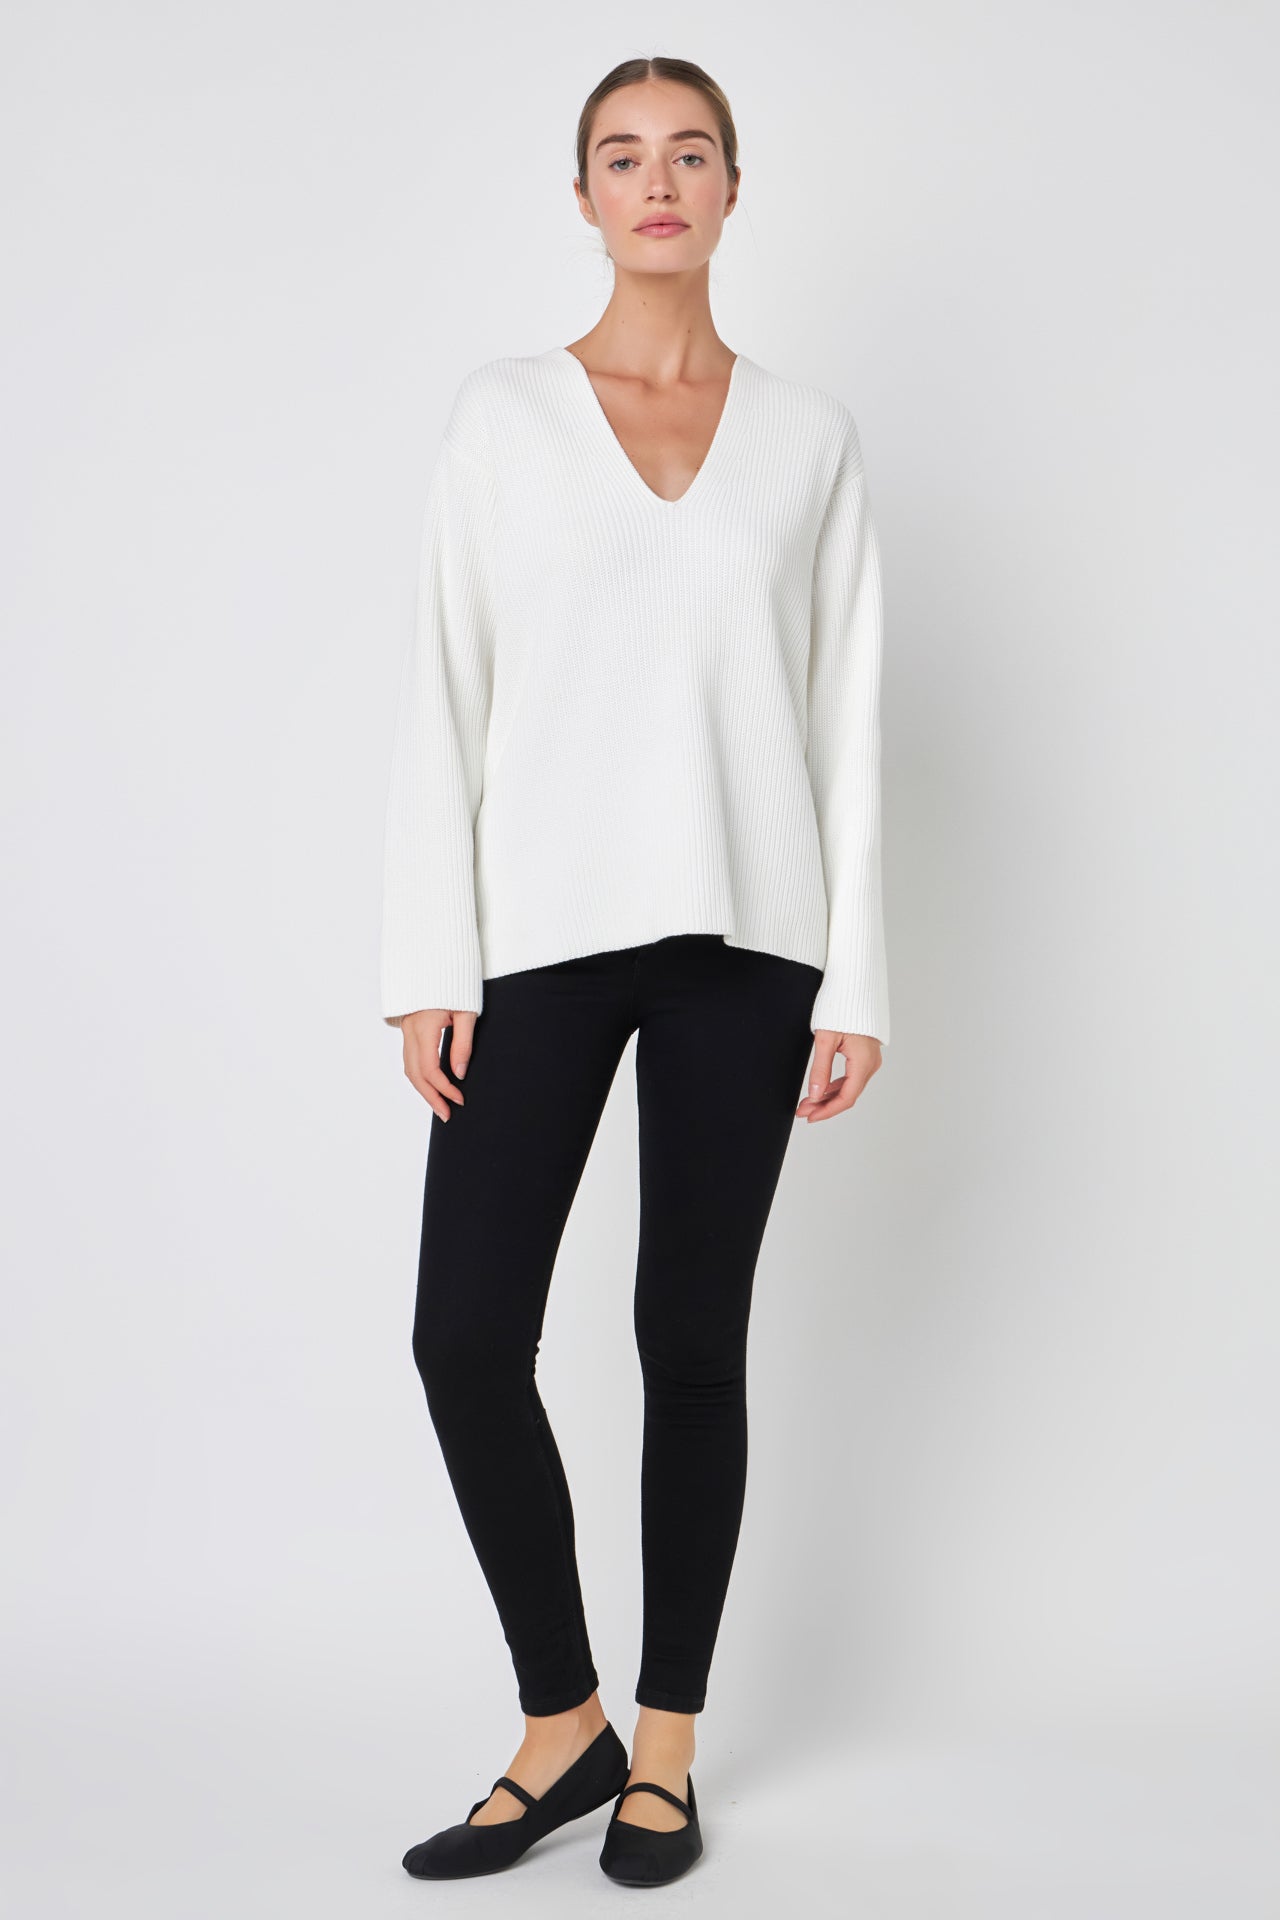 FREE THE ROSES - V-neckline Long Sleeve Sweater - SWEATERS & KNITS available at Objectrare